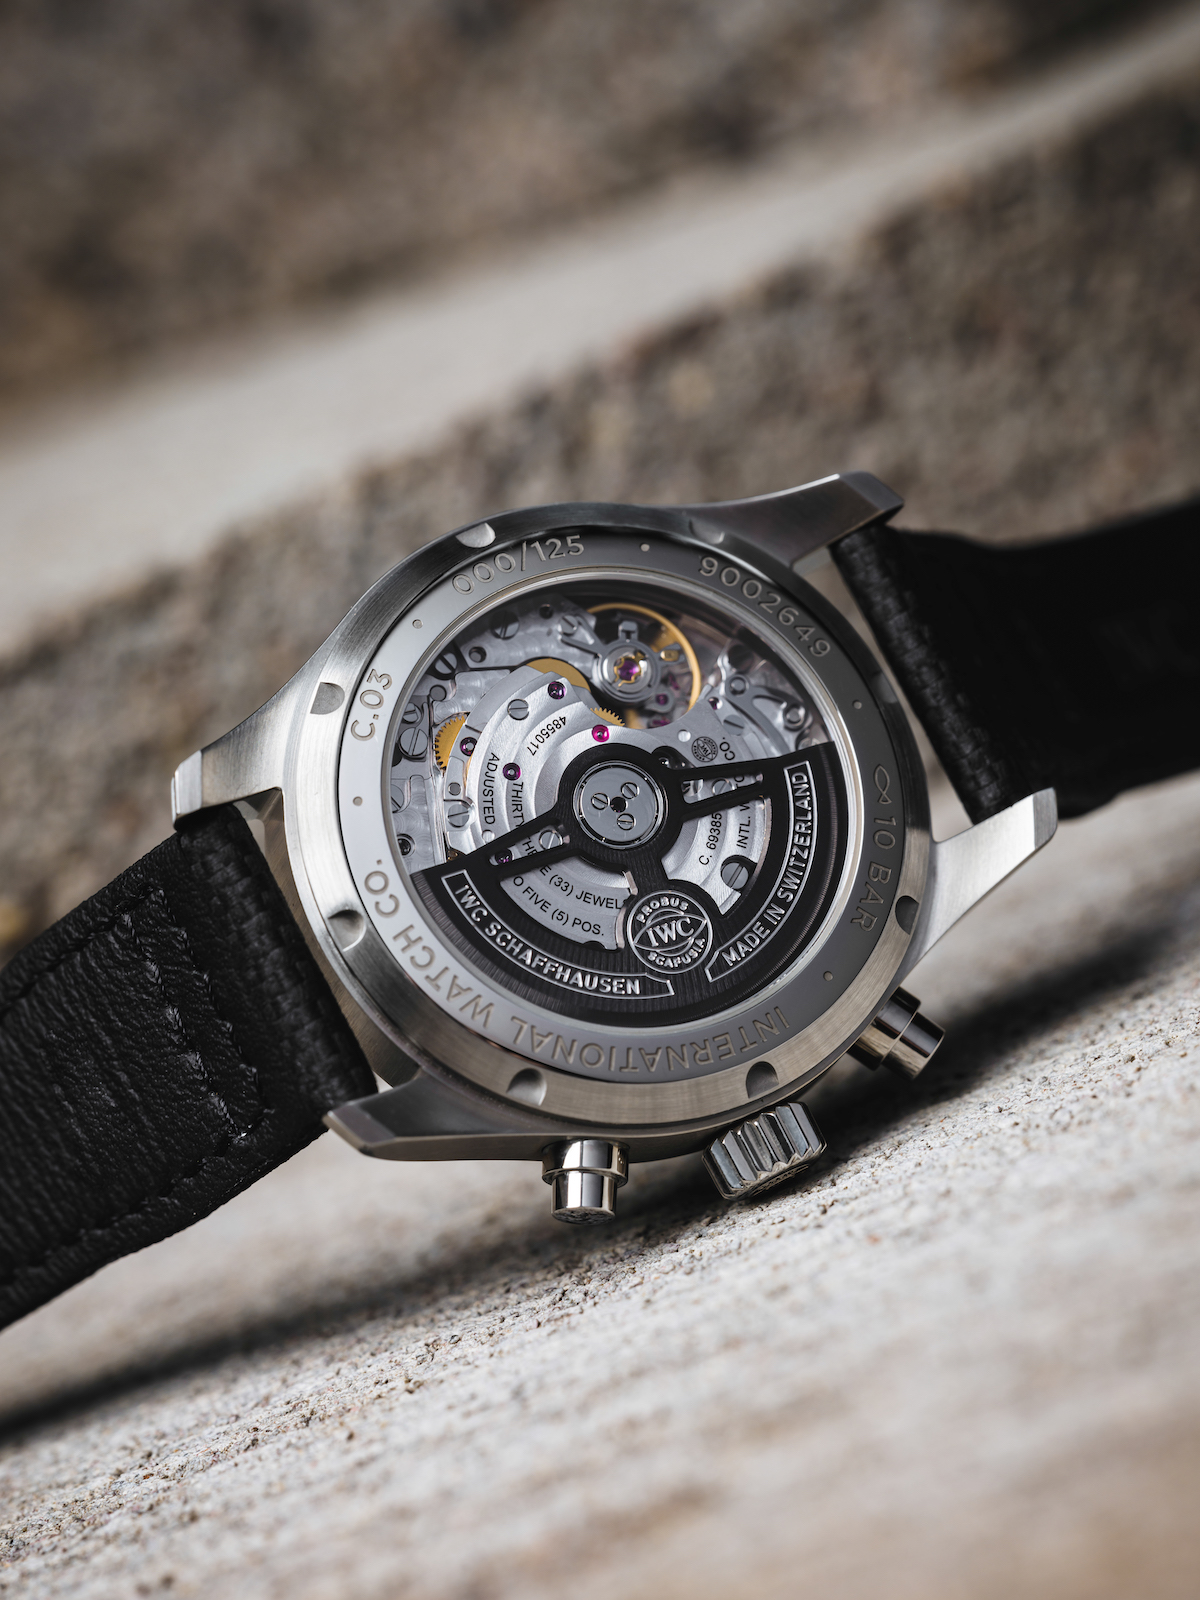 The C.03 collaborative Pilot's Watch Chronograph with IWC